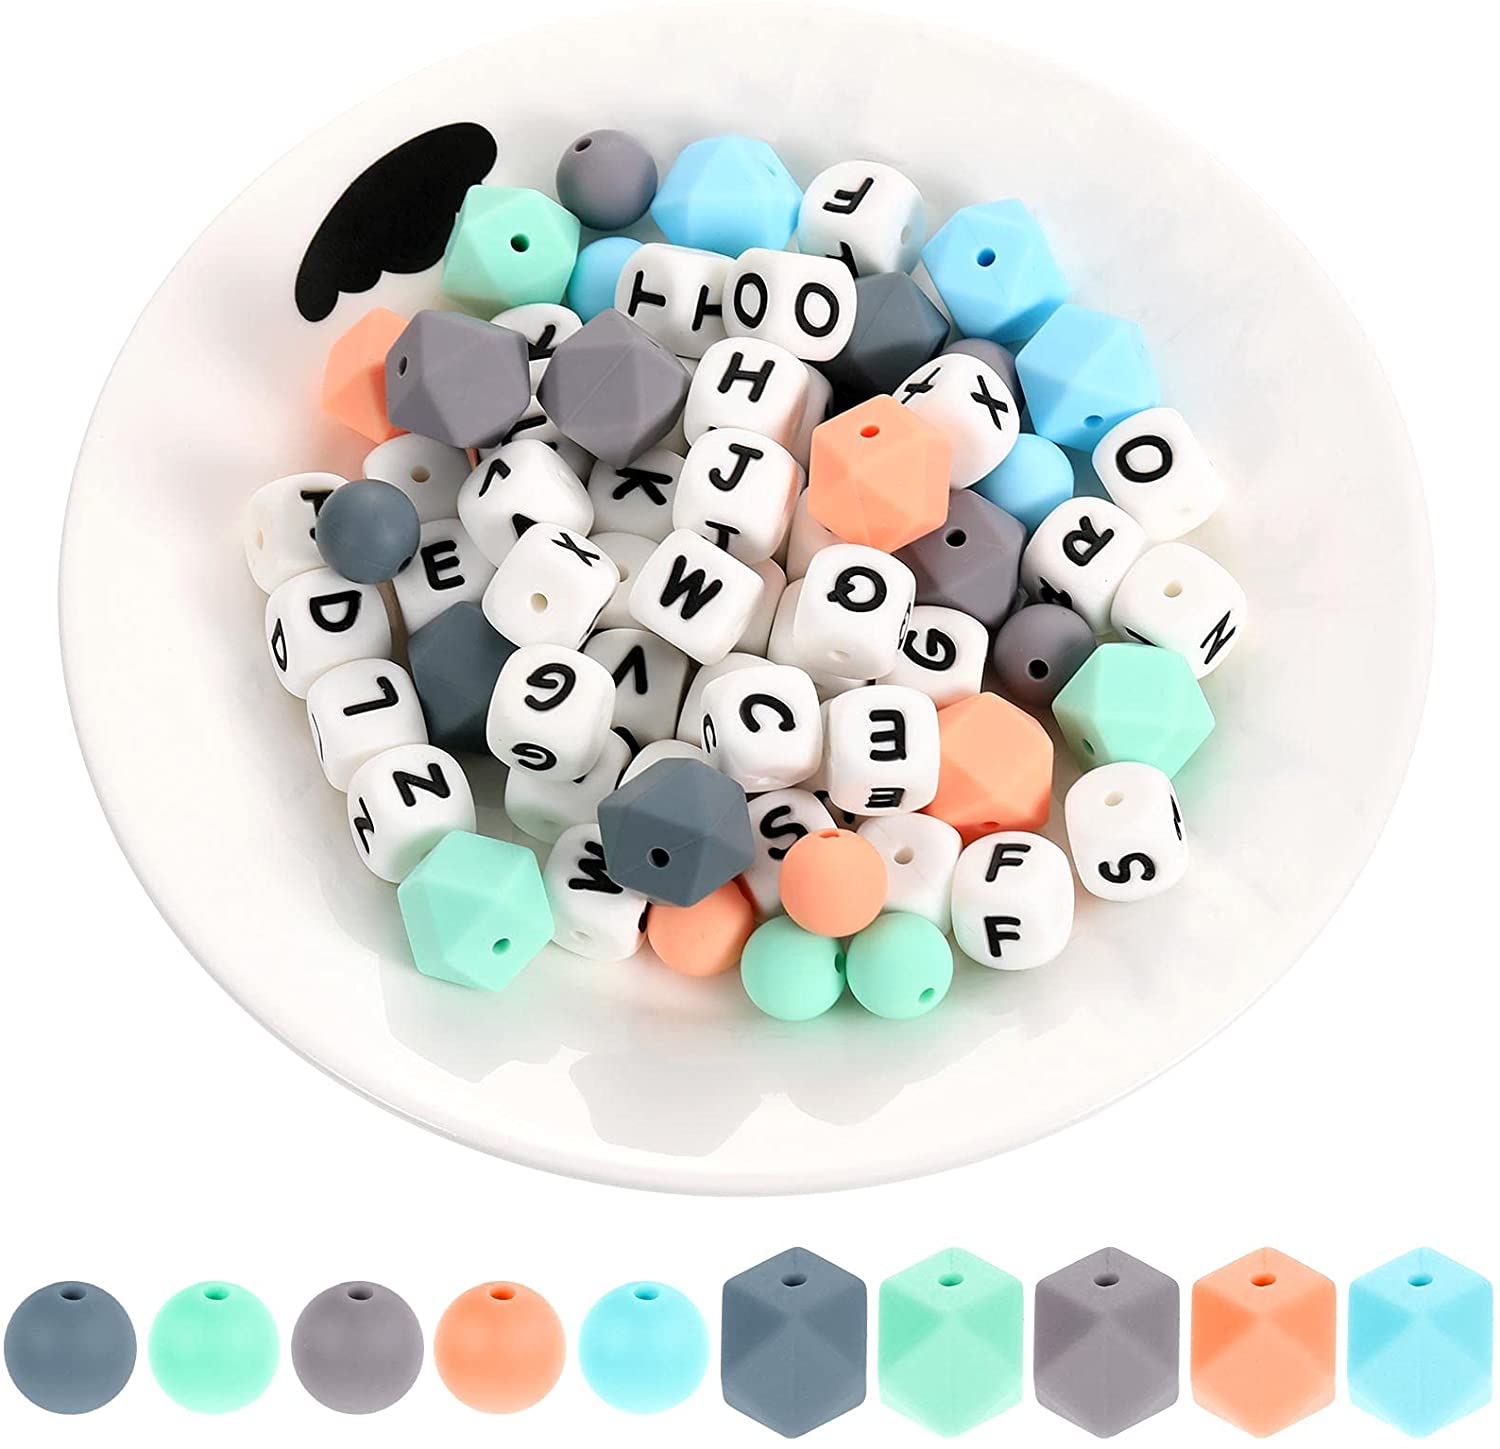 26x Creative Alphabet Silicone Teething Beads Baby Teether Chain Bracelet Crafts 